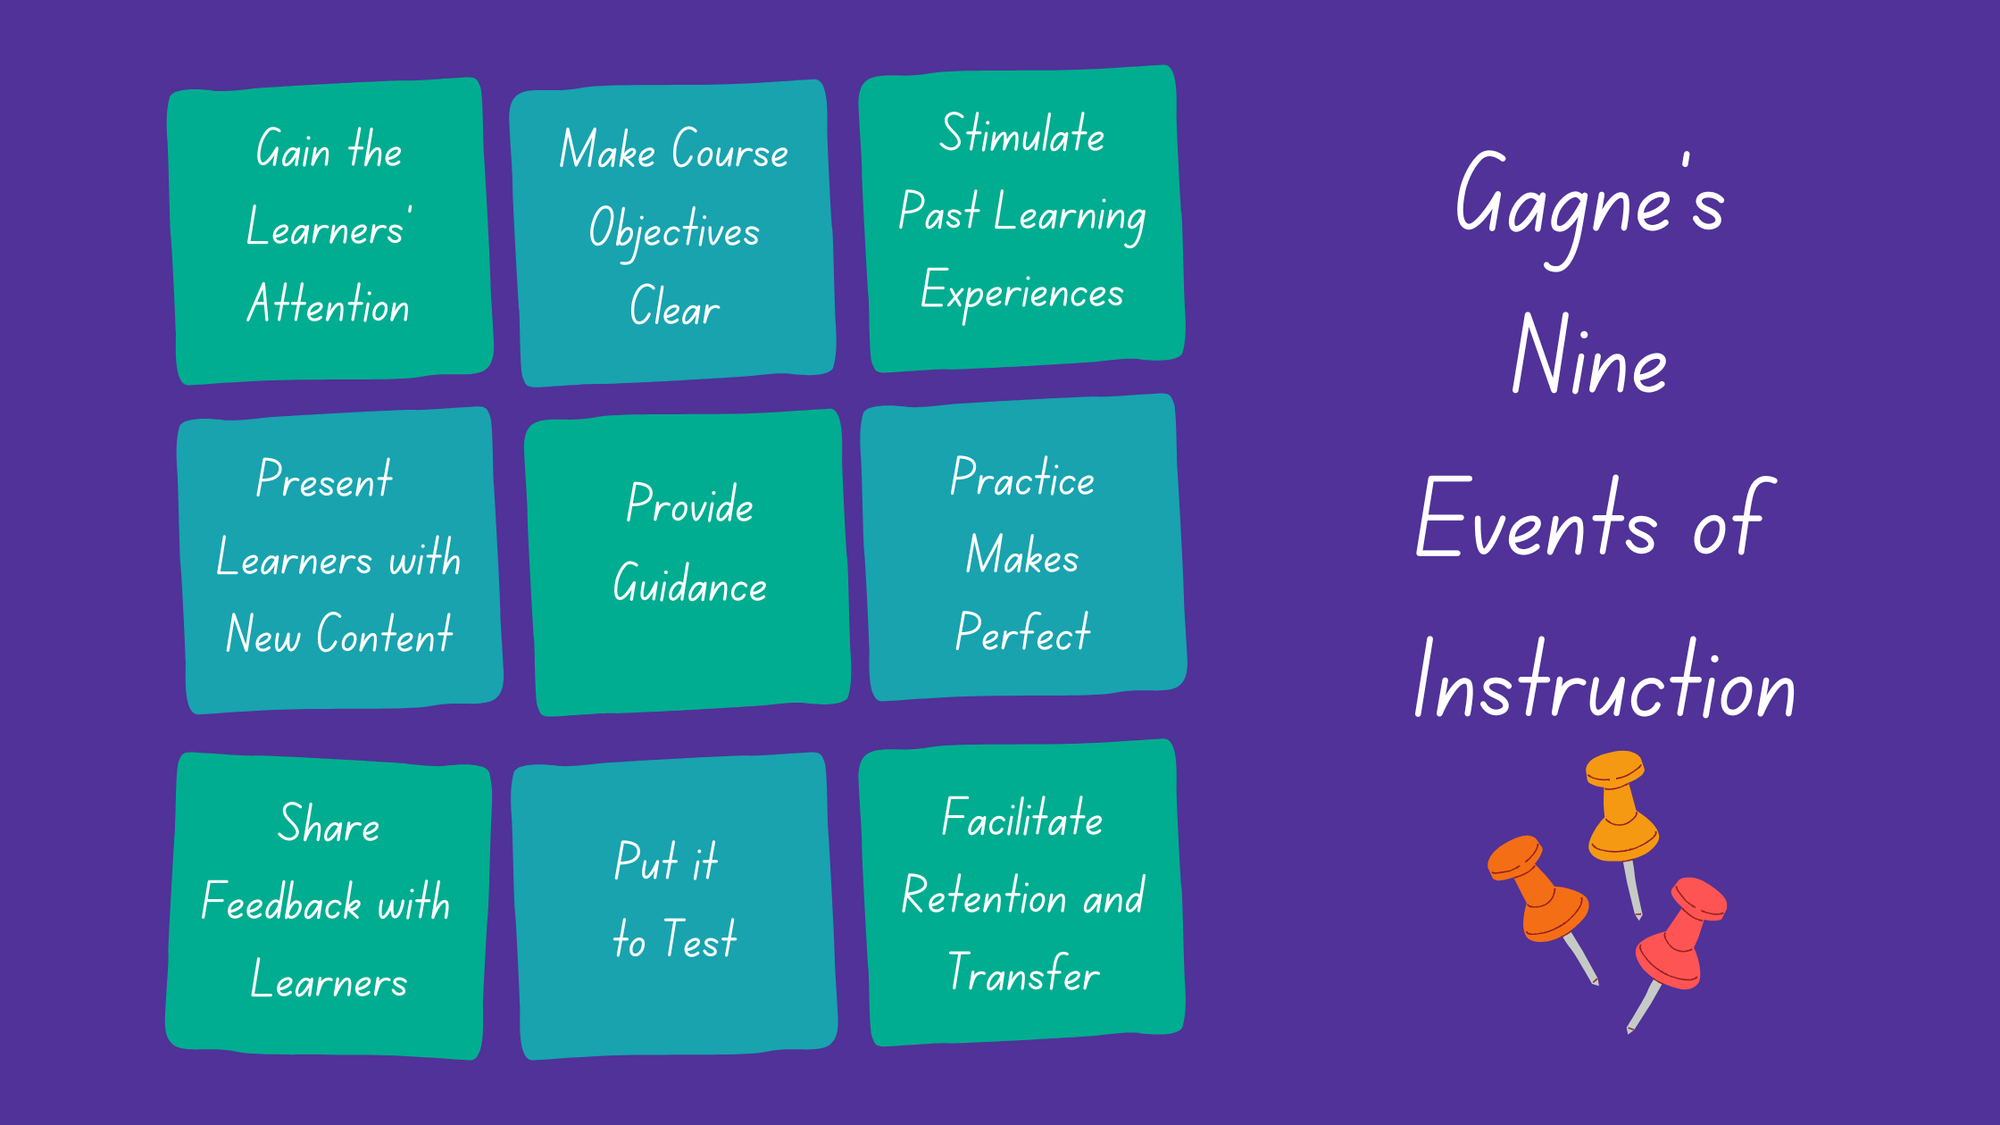                  Gagne’s nine events of instruction